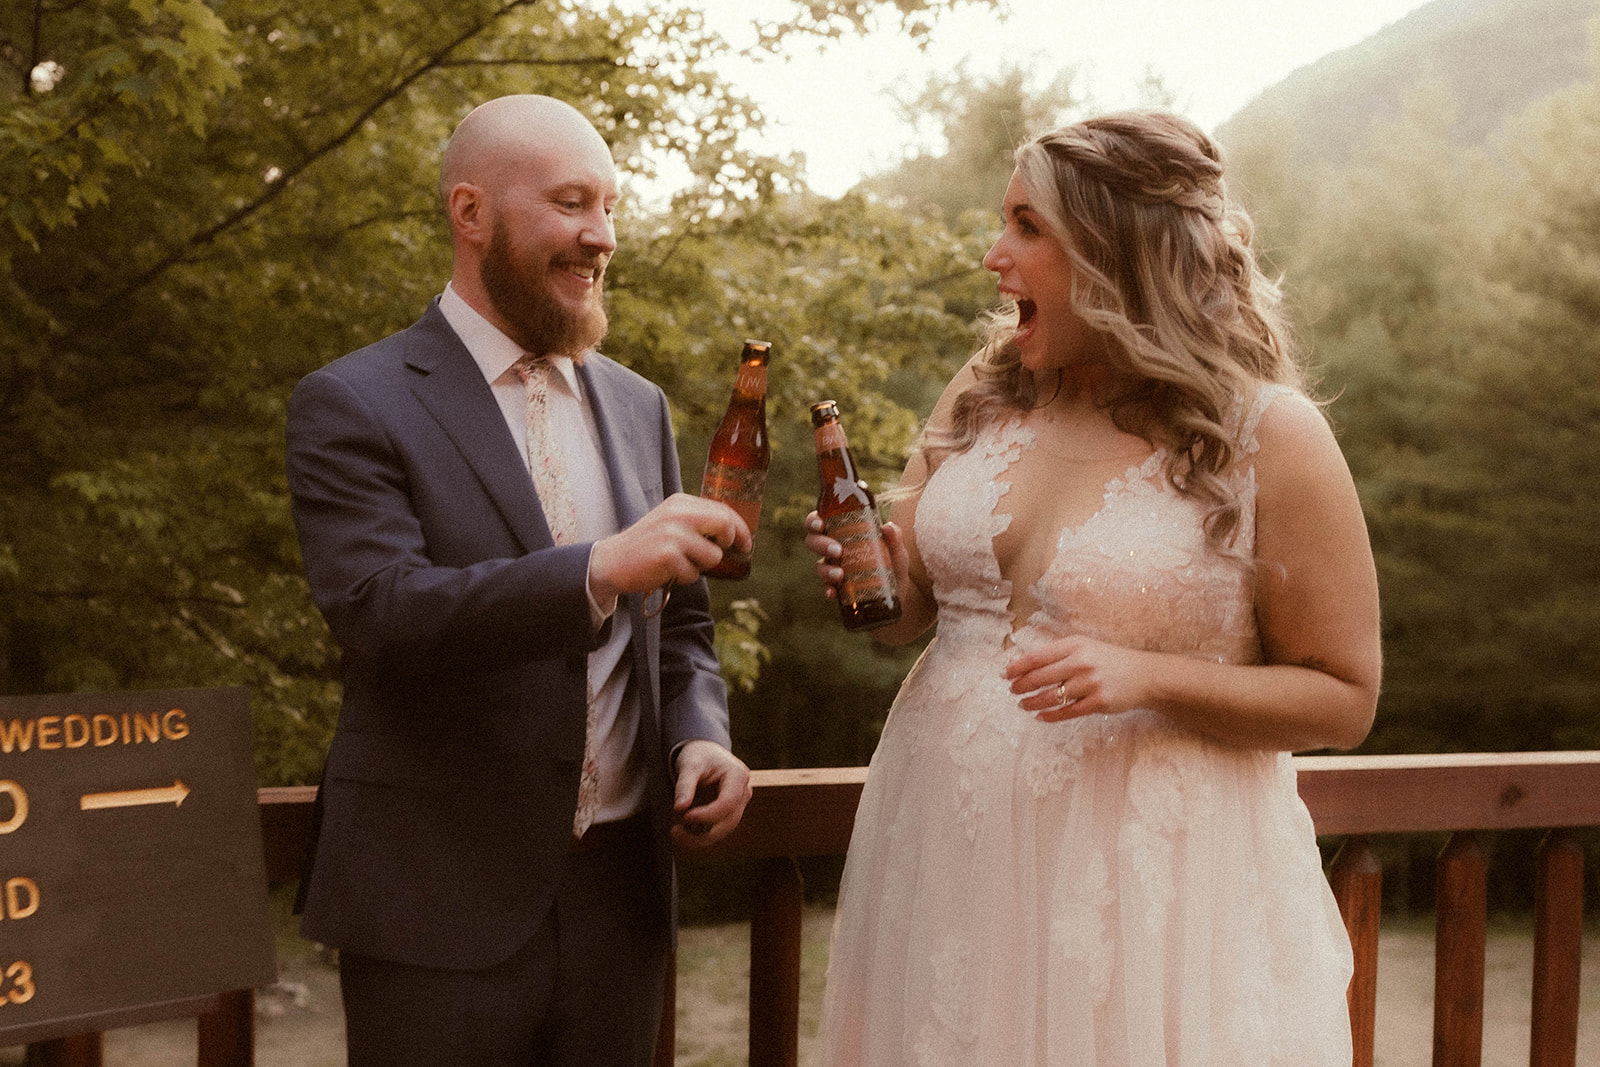 A Dreamy Wedding Day In the Adirondack mountains